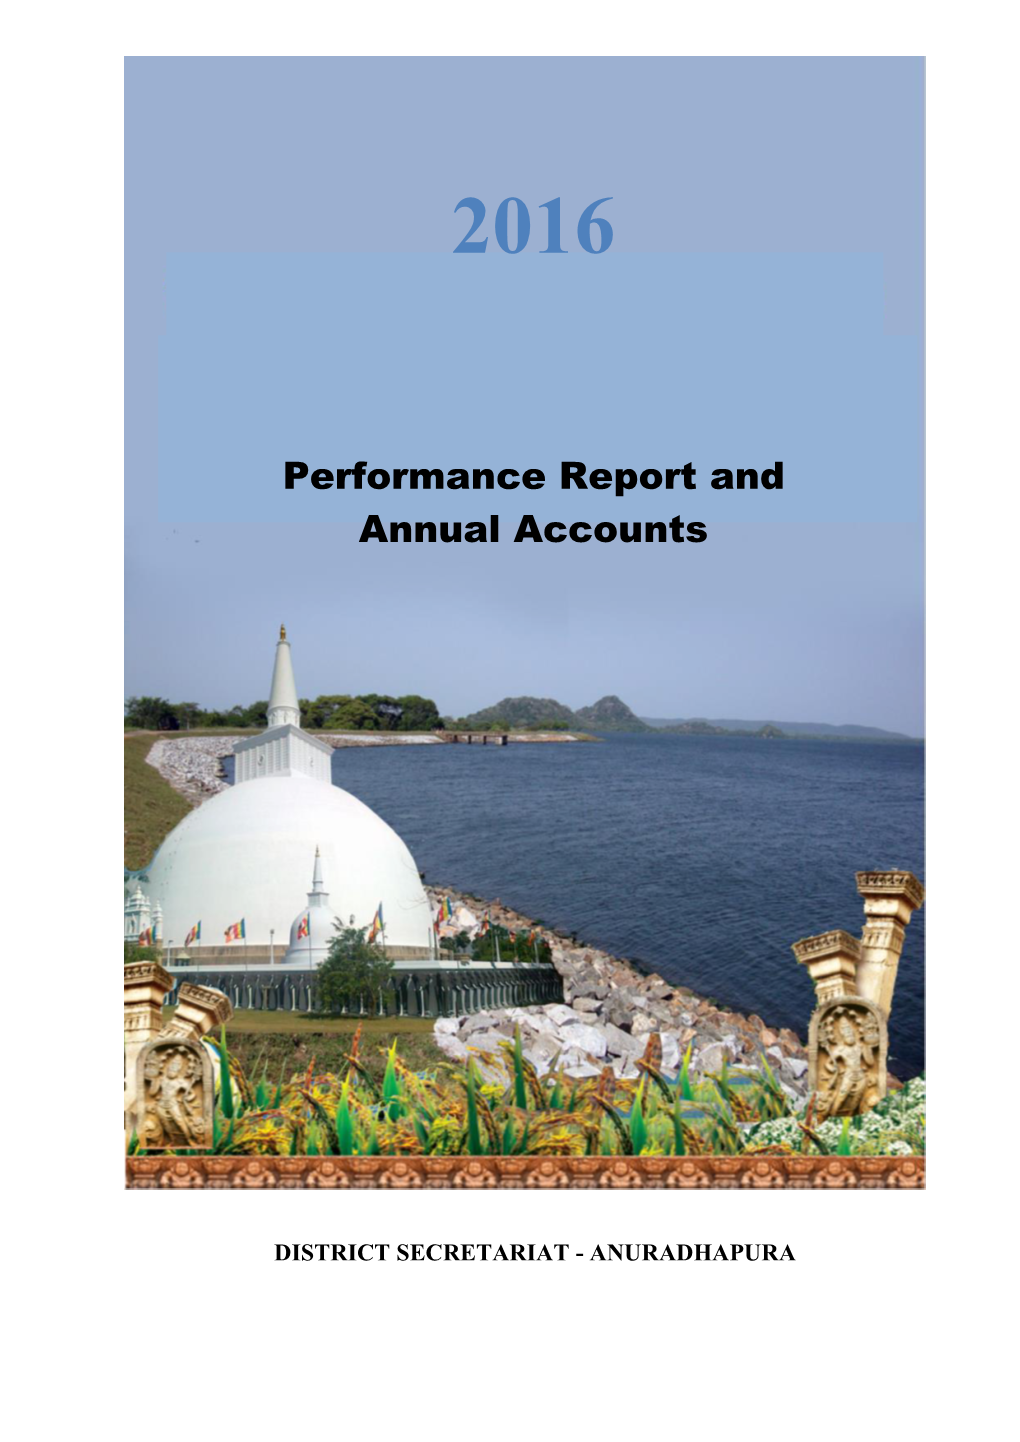 Performance Report and Annual Accounts of the District Secretariat